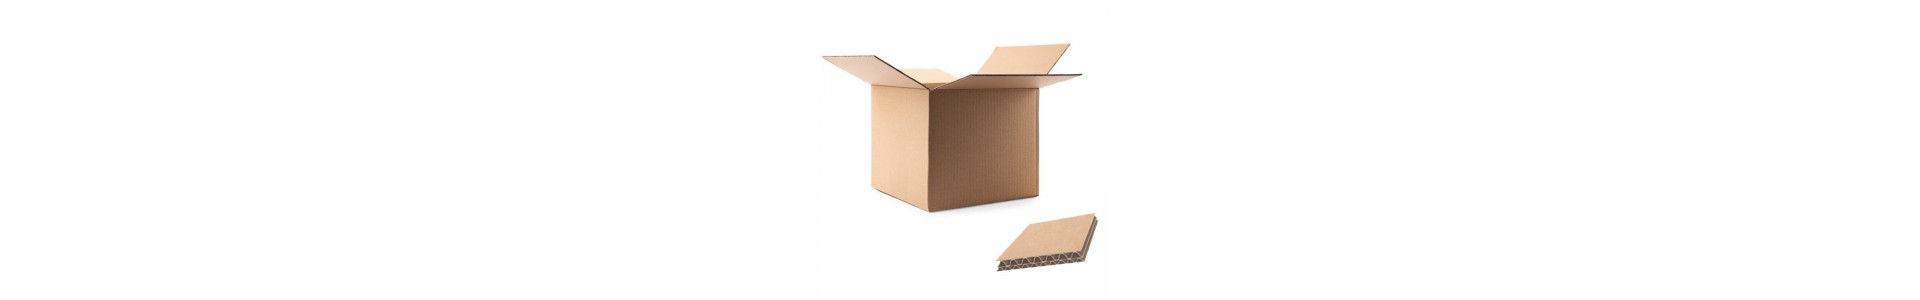 Double corrugated boxes